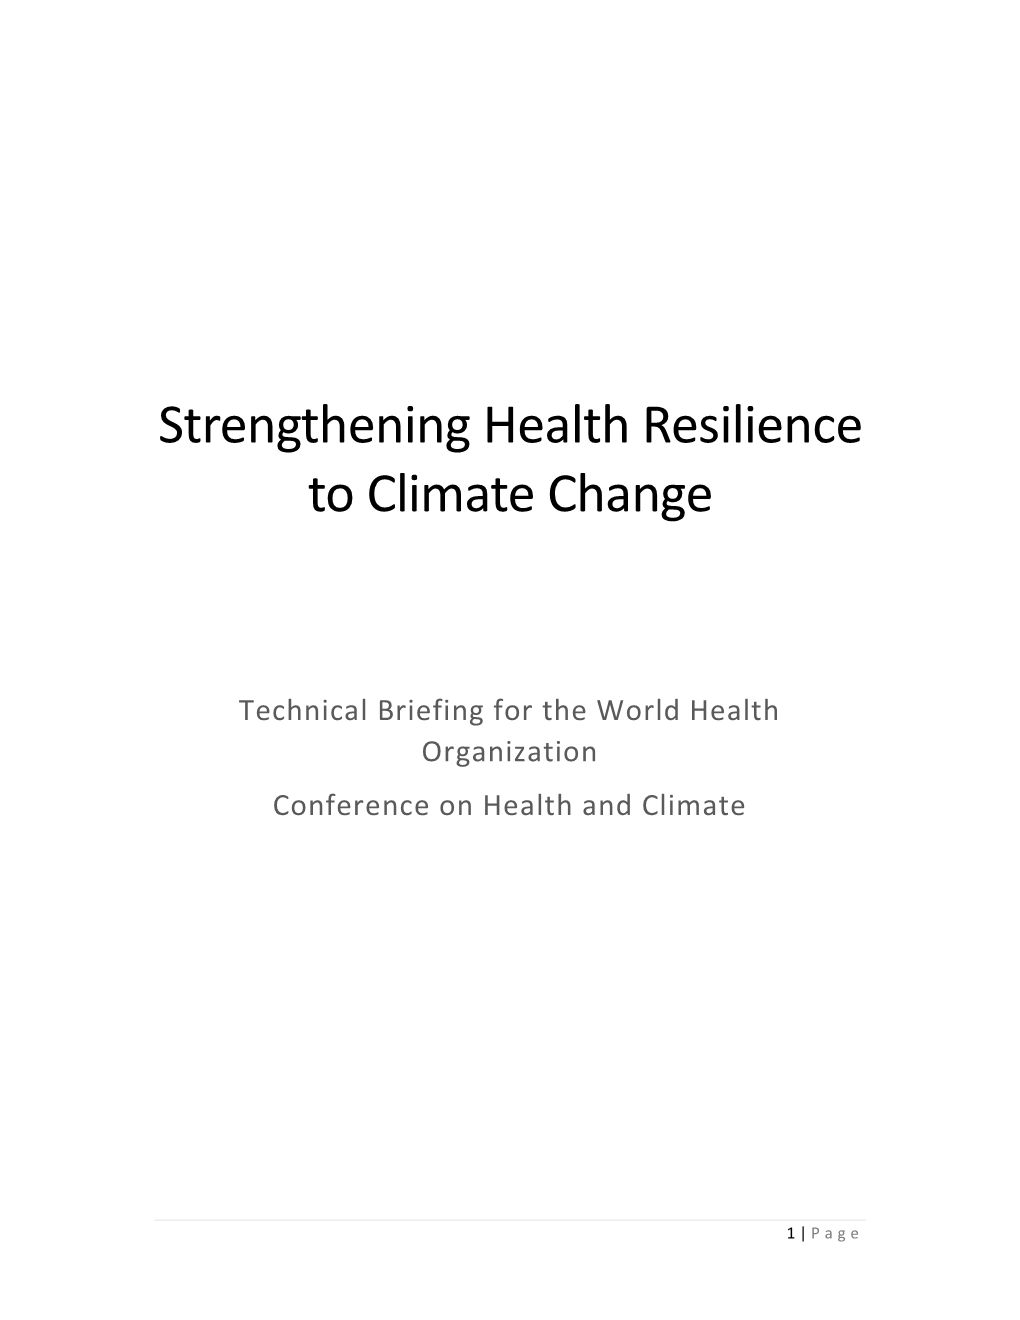 Strengthening Health Resilience to Climate Change